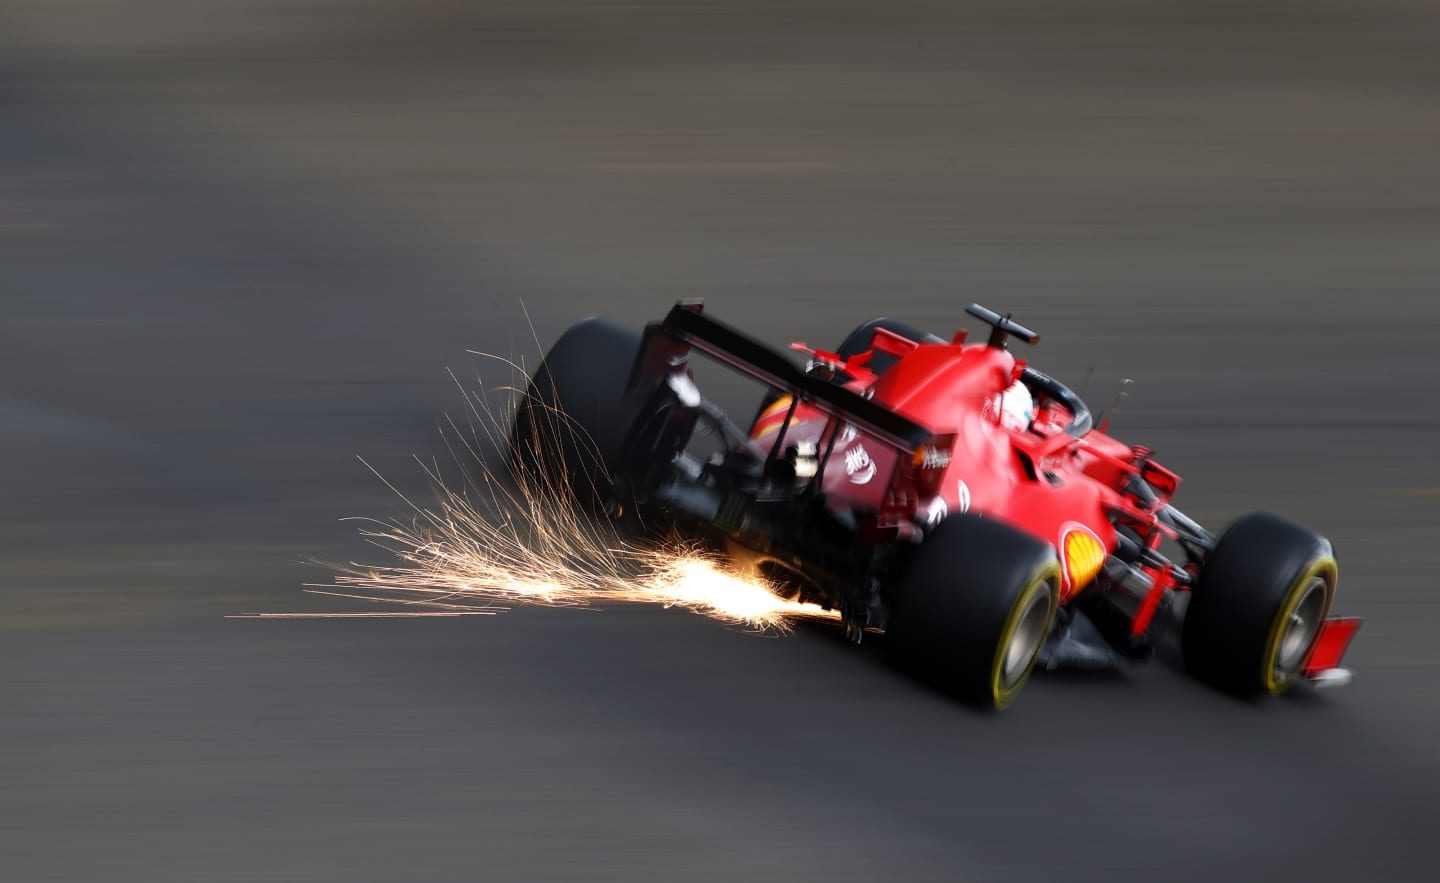 SPA, BELGIUM - AUGUST 27: Sparks fly behind Charles Leclerc of Monaco driving the (16) Scuderia